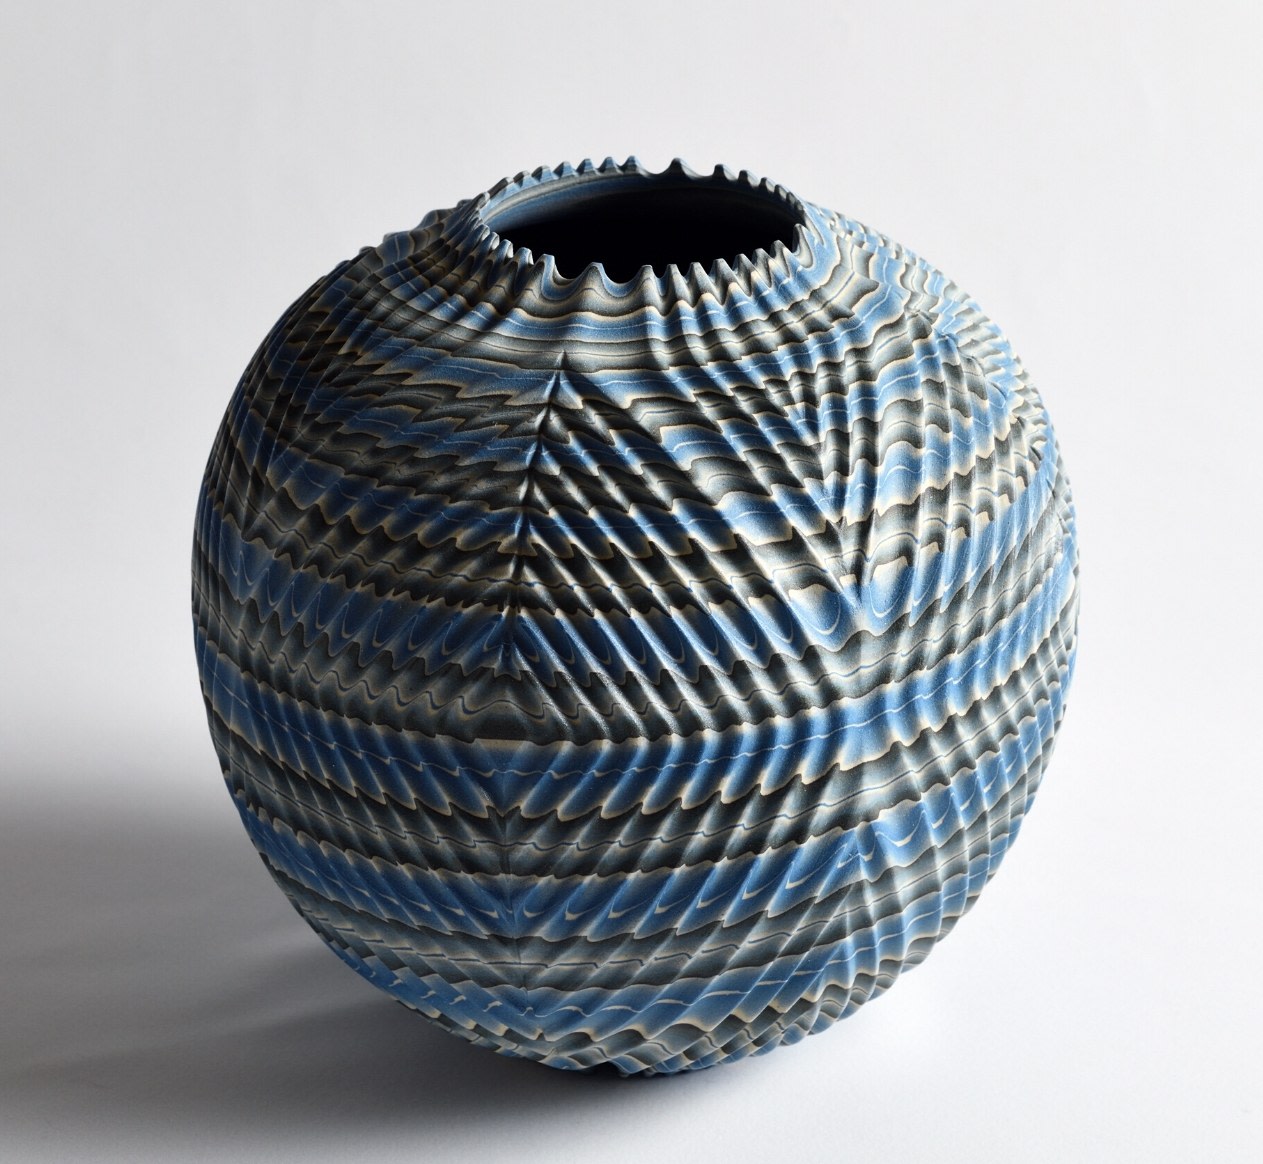 Marbleized, carved, ridged-surface vessel &quot;Waves&quot;, 2019